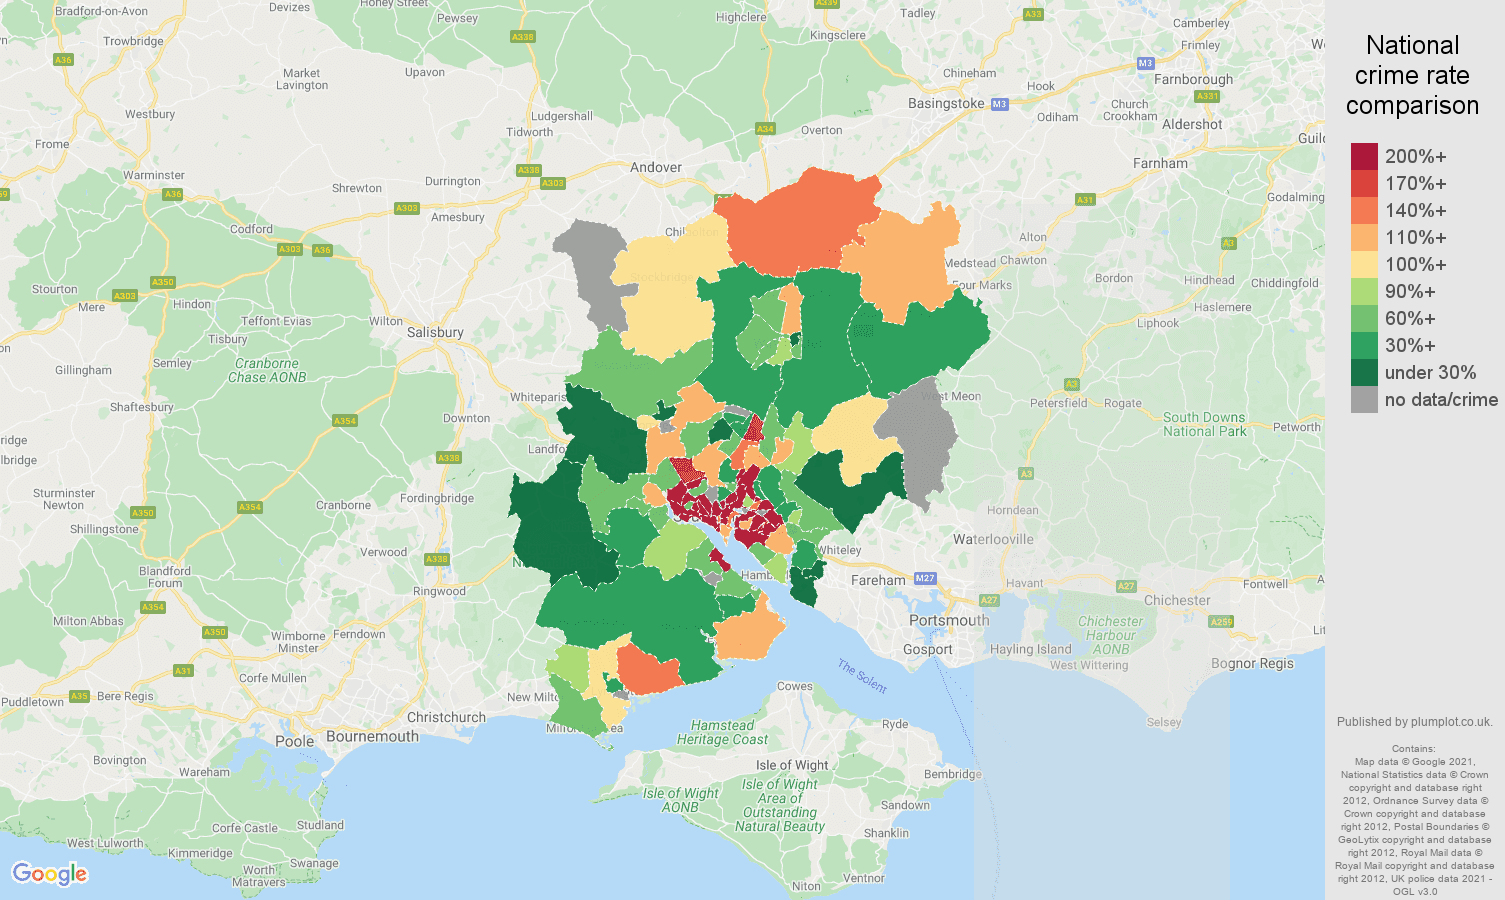 Southampton possession of weapons crime statistics in maps and graphs.